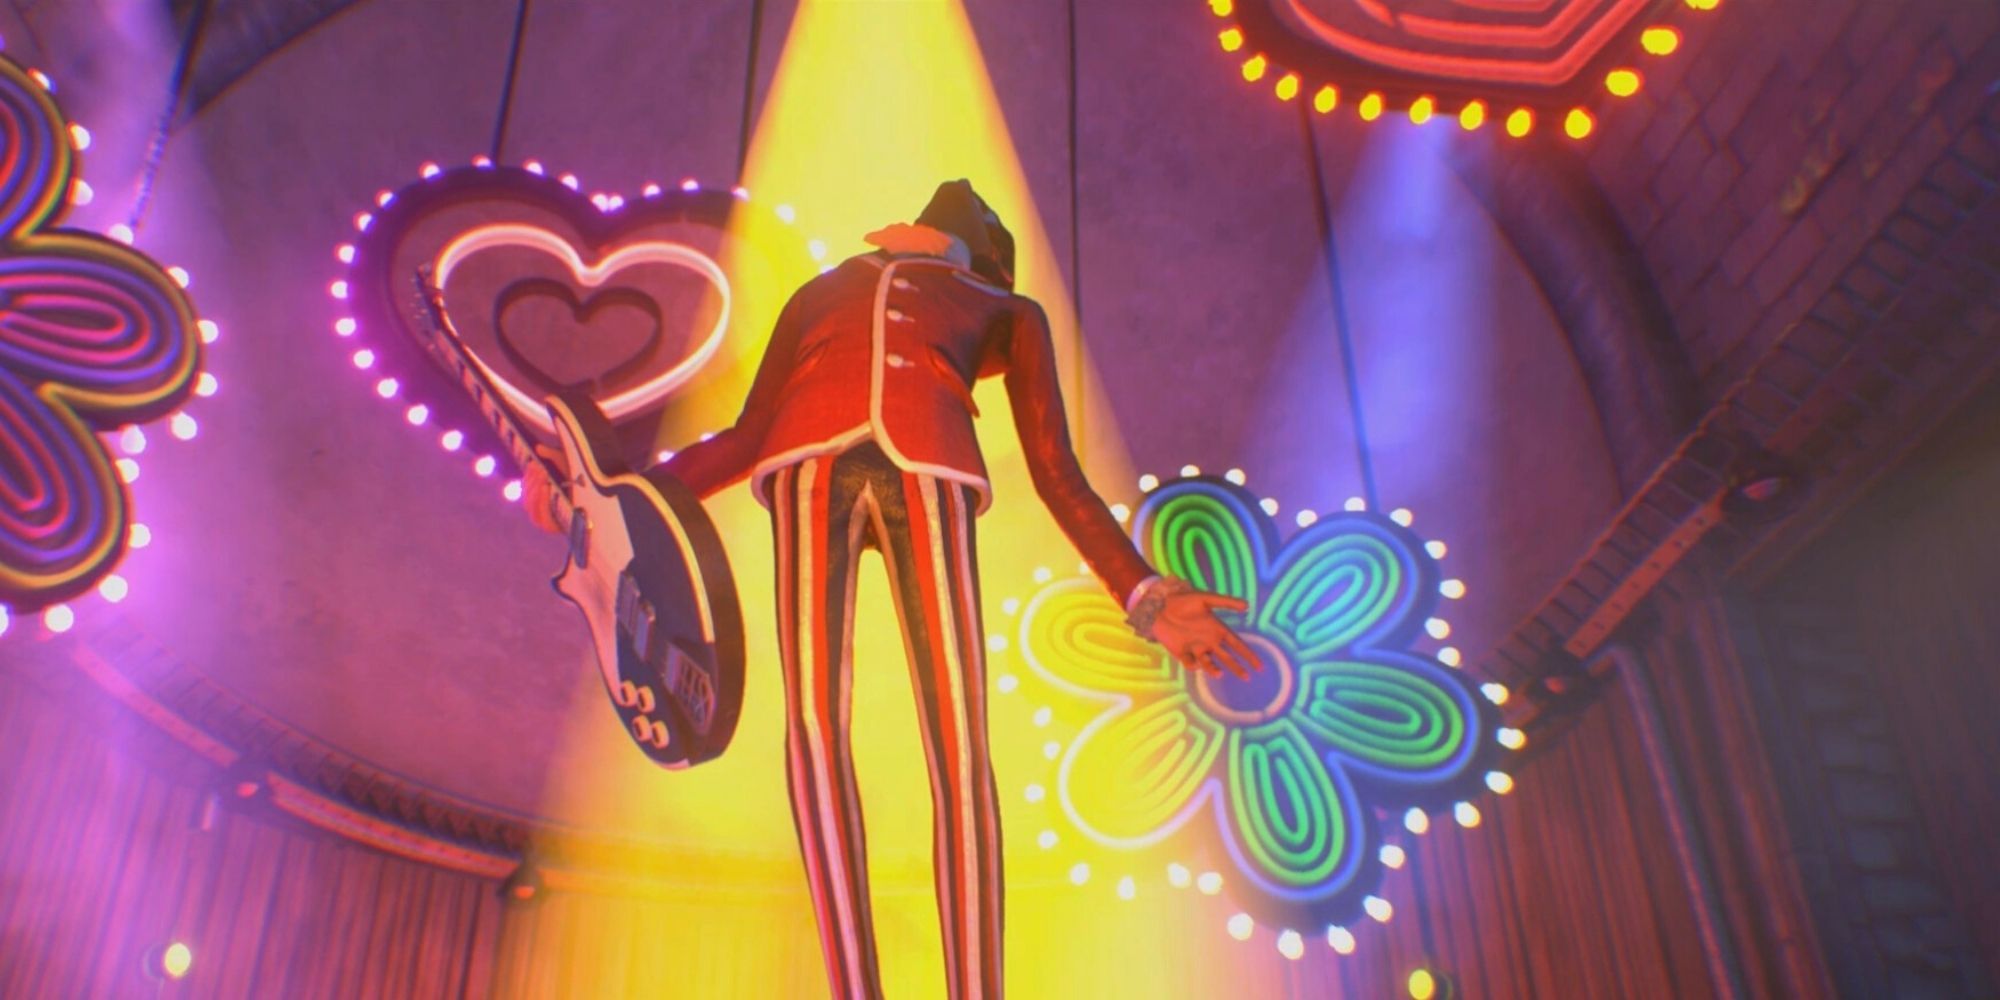 Nick Lightbearer ascends with his guitar in front of floral and heart neon lights